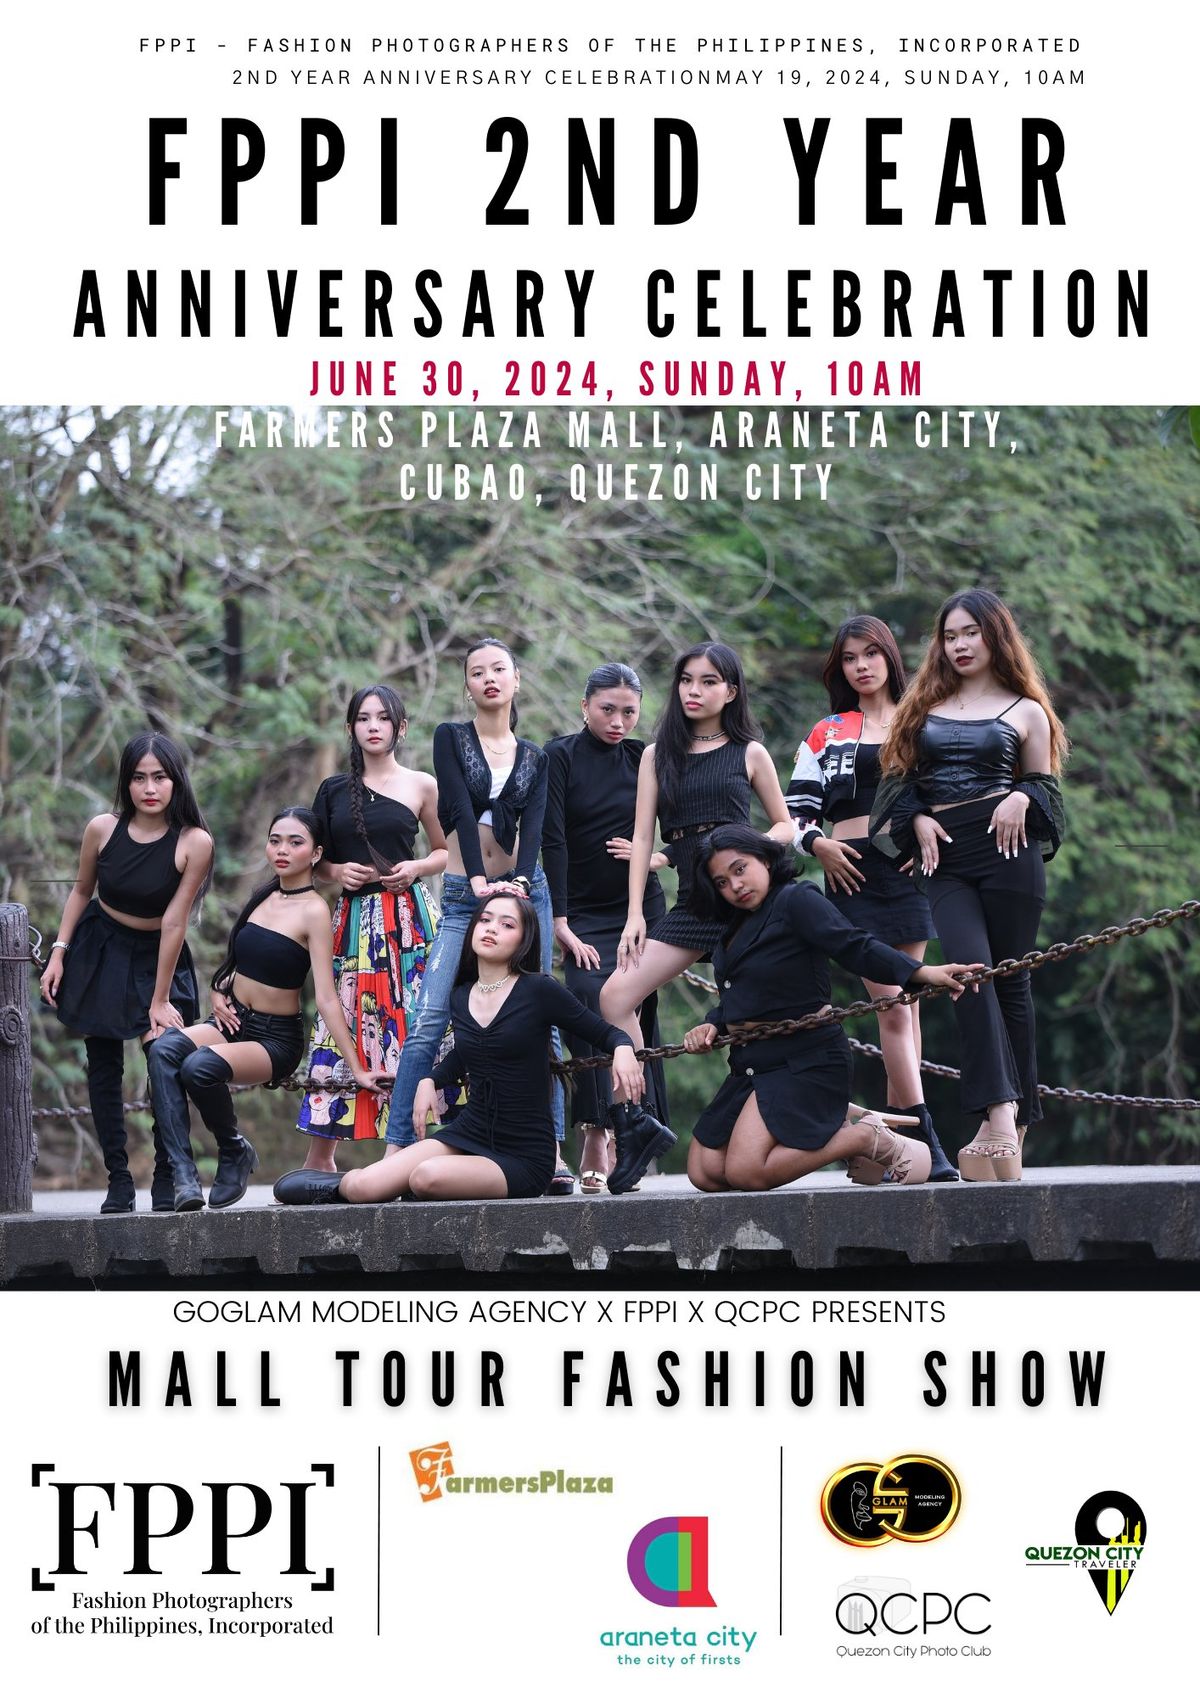 Join the 2nd Year Anniversary celebration of FPPI (Fashion Photographers of the Philippines, Incorpo